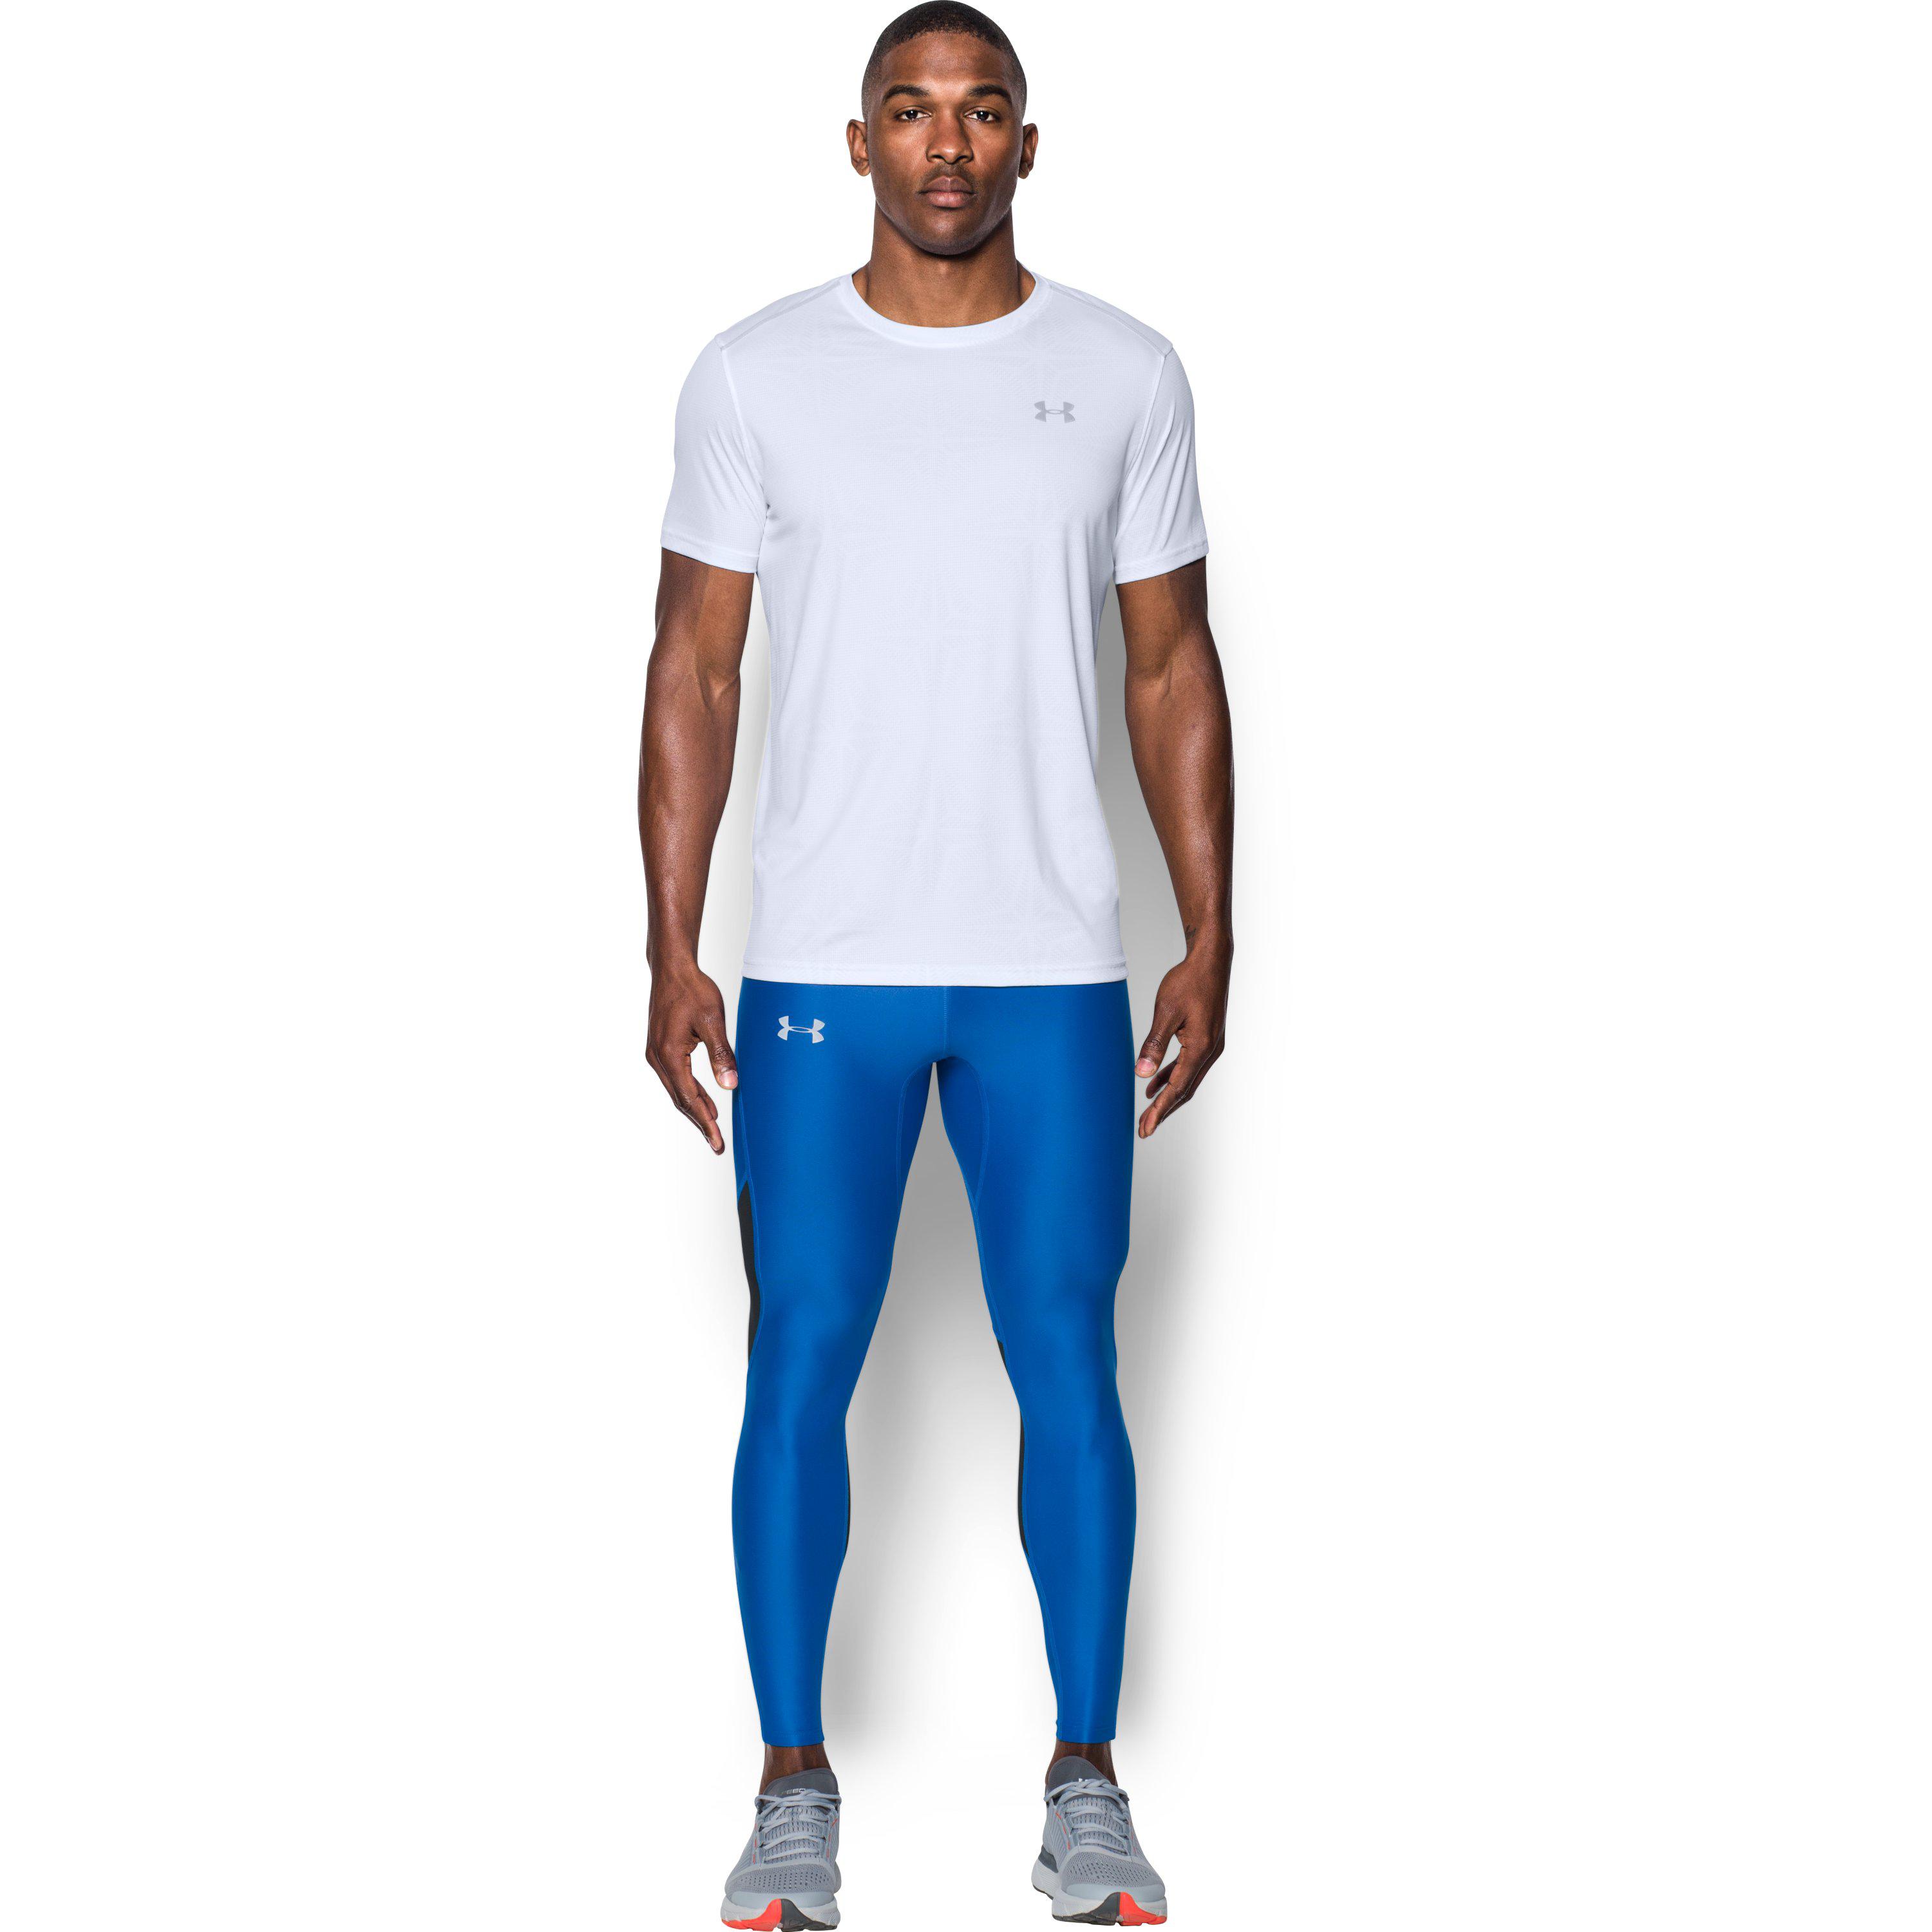 Lyst - Under Armour Men's Ua Coolswitch Run Tights in Blue for Men